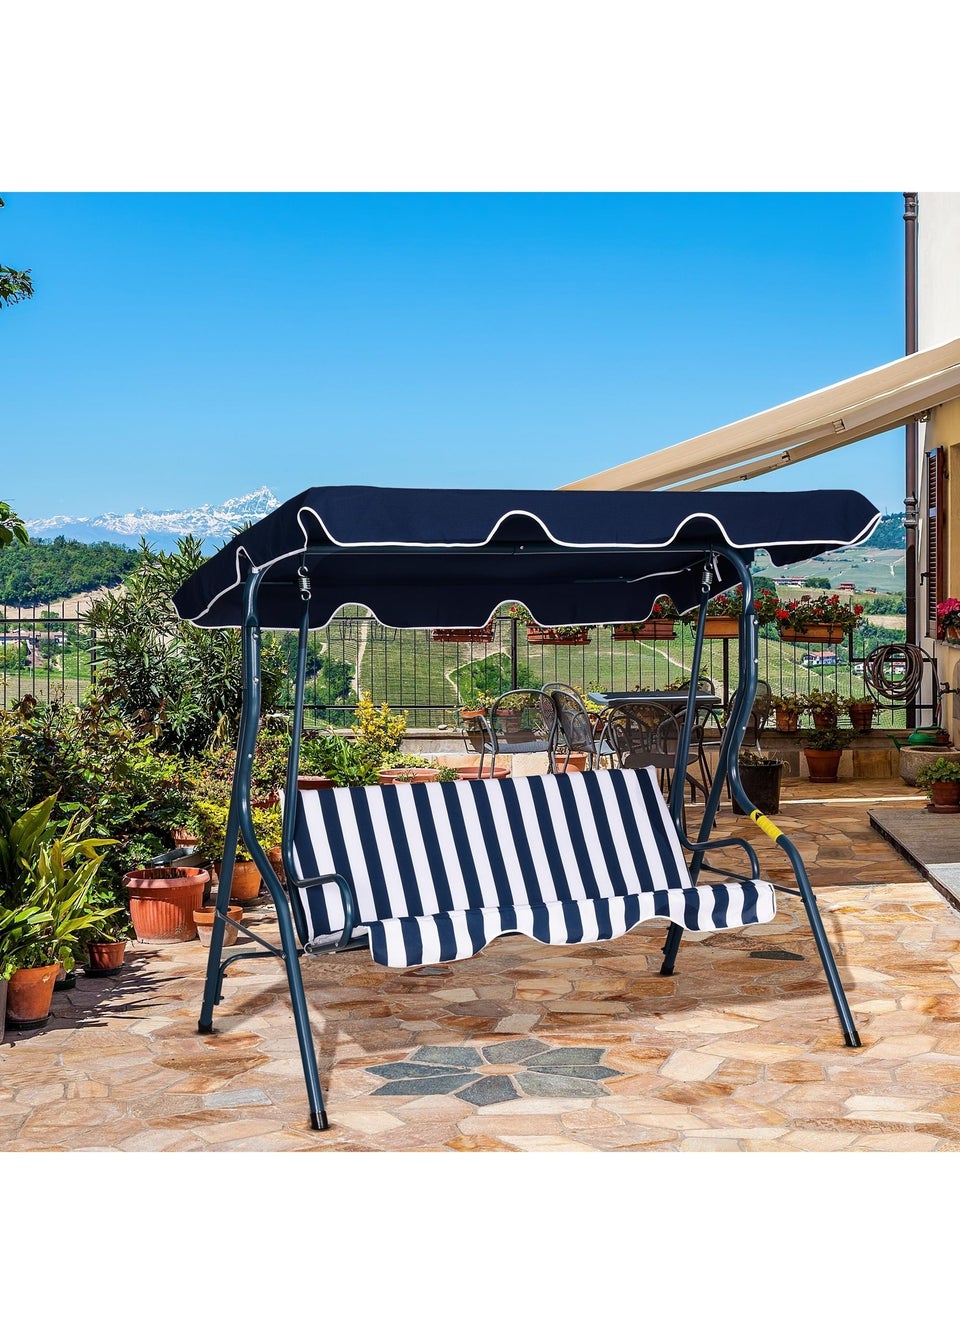 Outsunny 3 Seater Canopy Swing Chair Outdoor Garden Bench with Adjustable Canopy